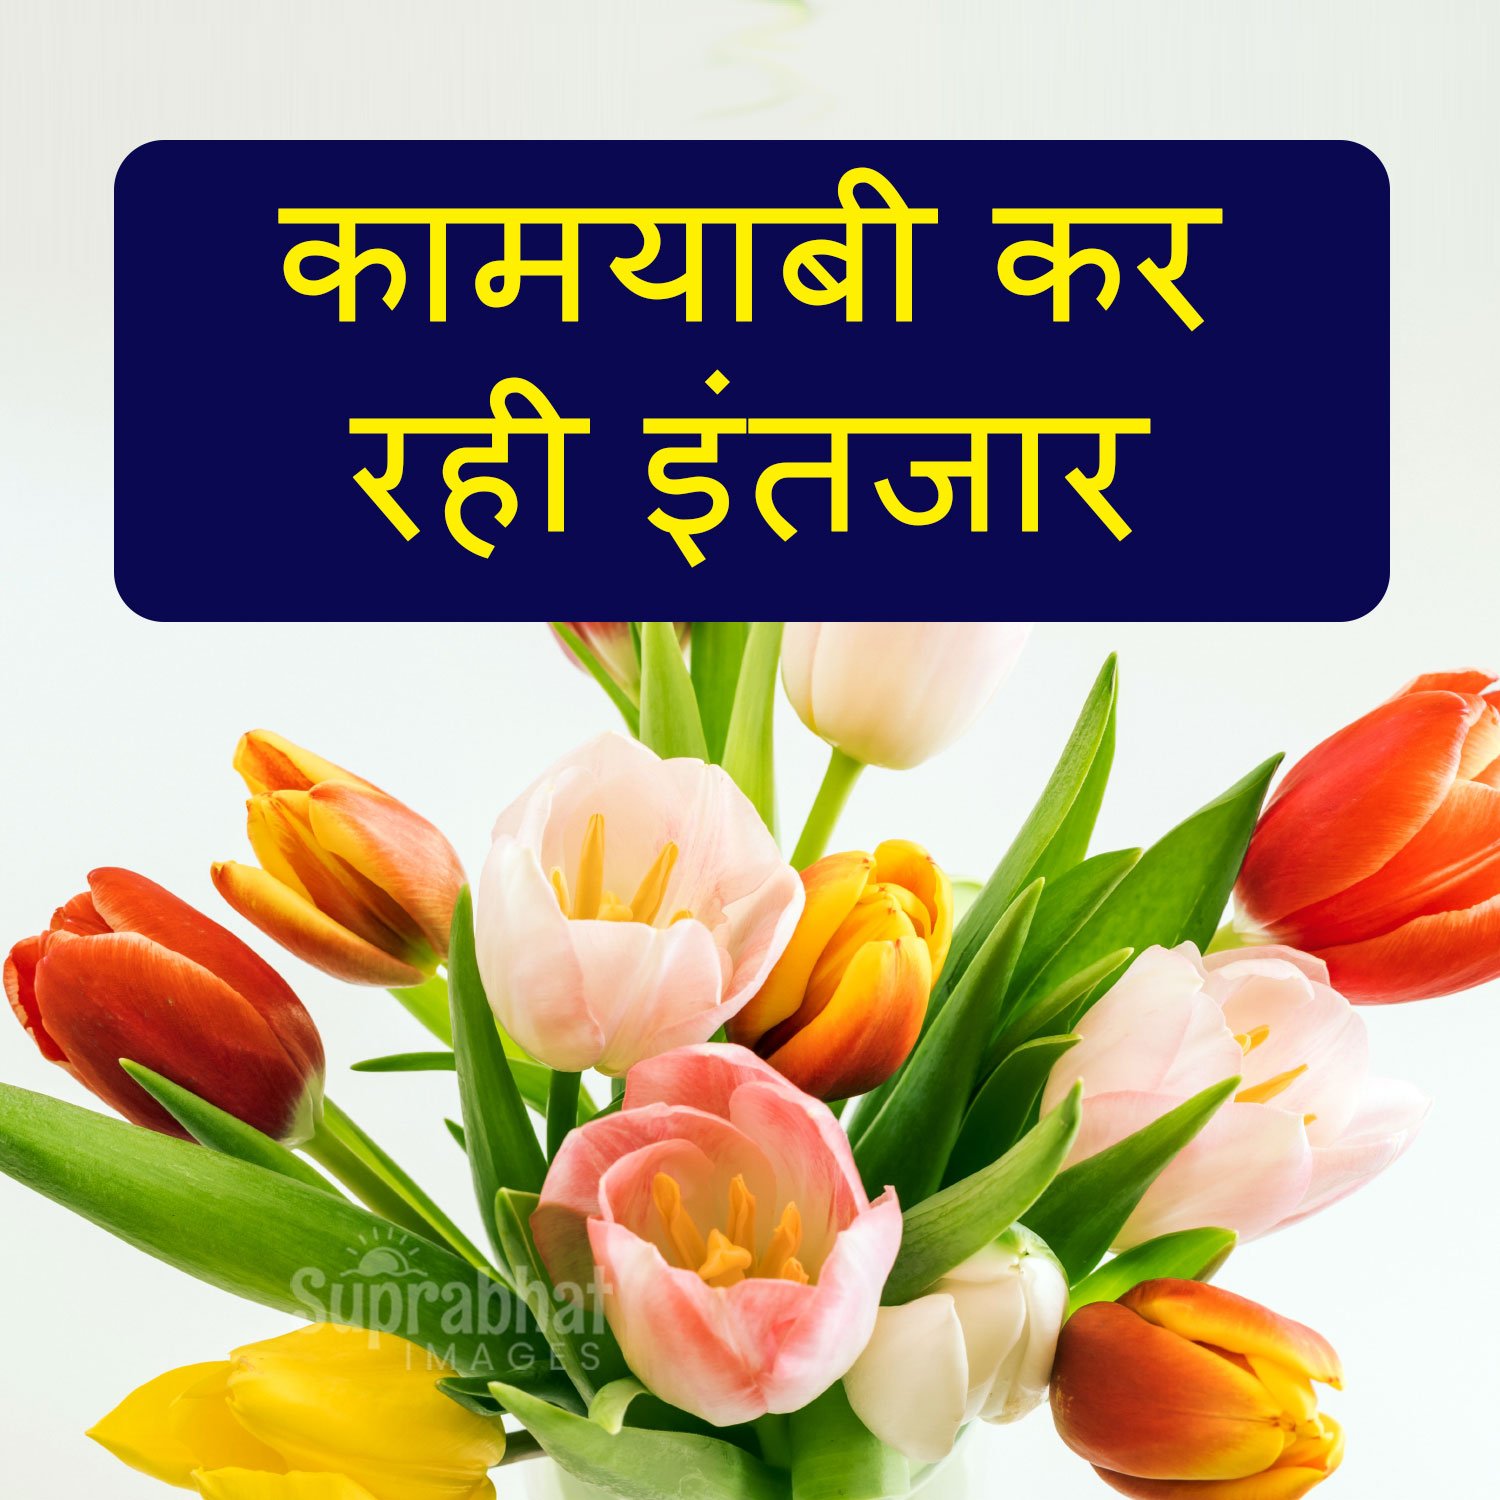 Good Morning Quotes in Hindi with Tulip Flowers